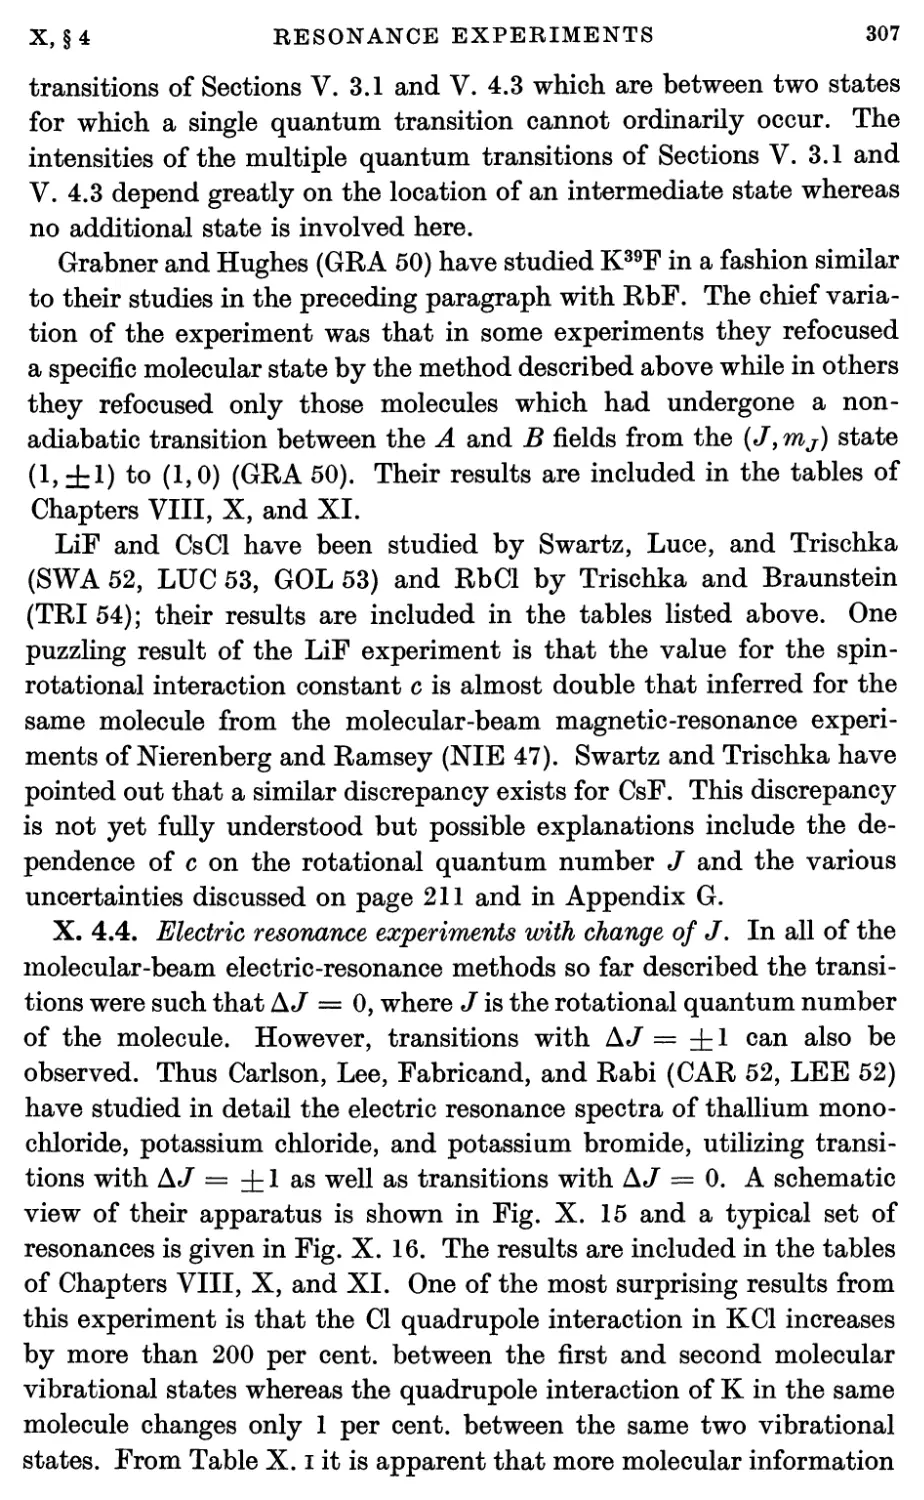 X.4.4. Electric resonance experiments with change of J